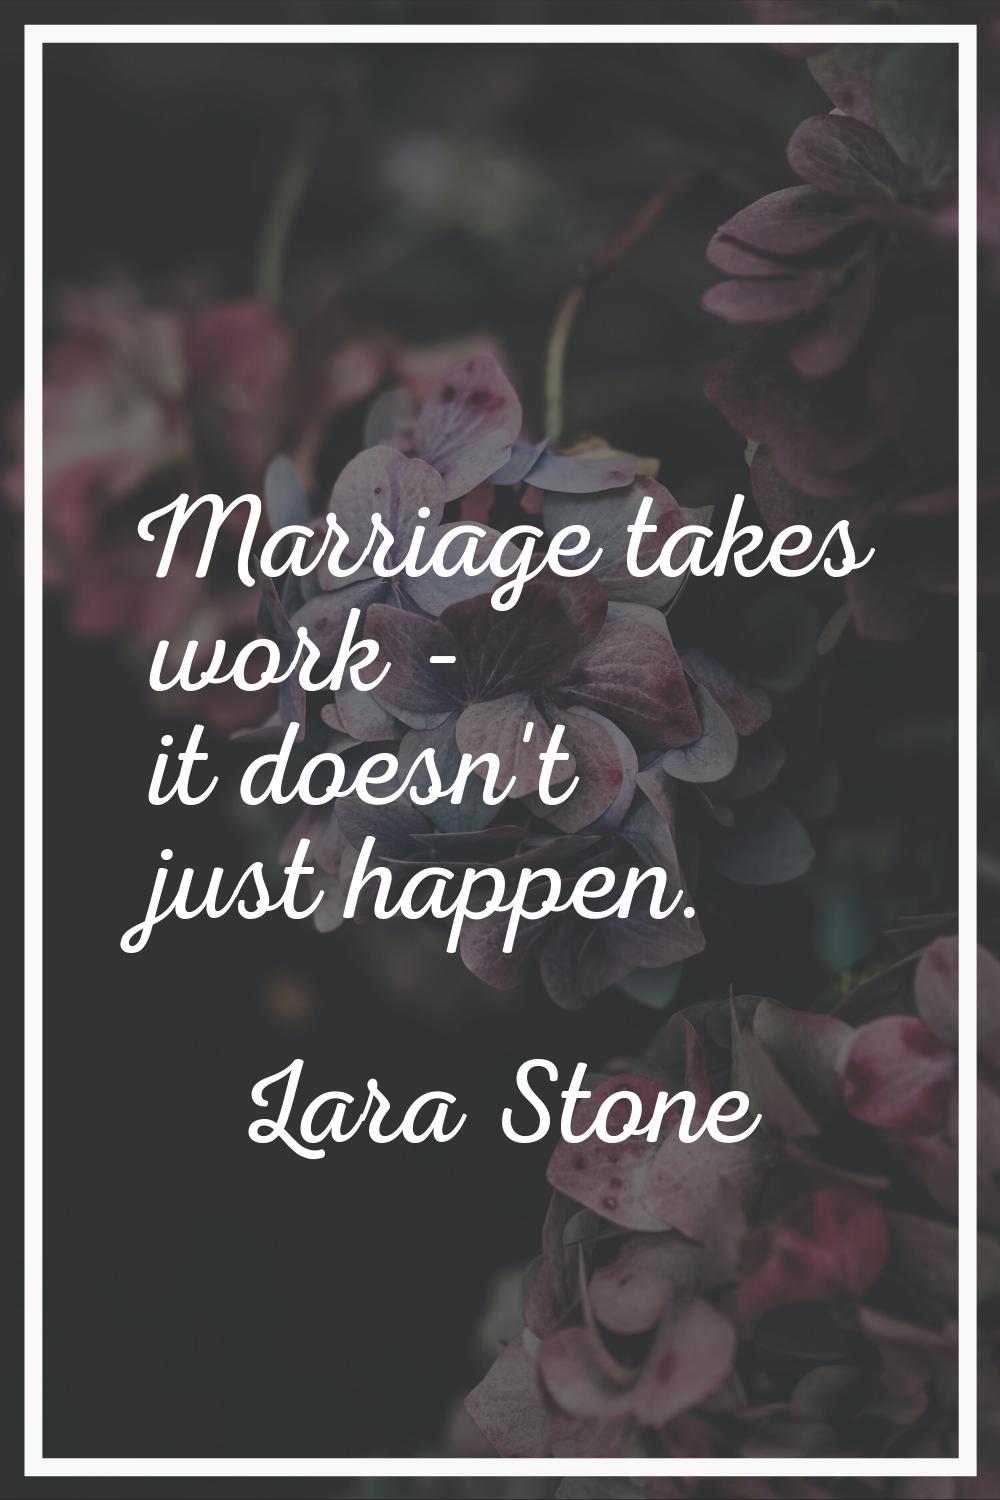 Marriage takes work - it doesn't just happen.